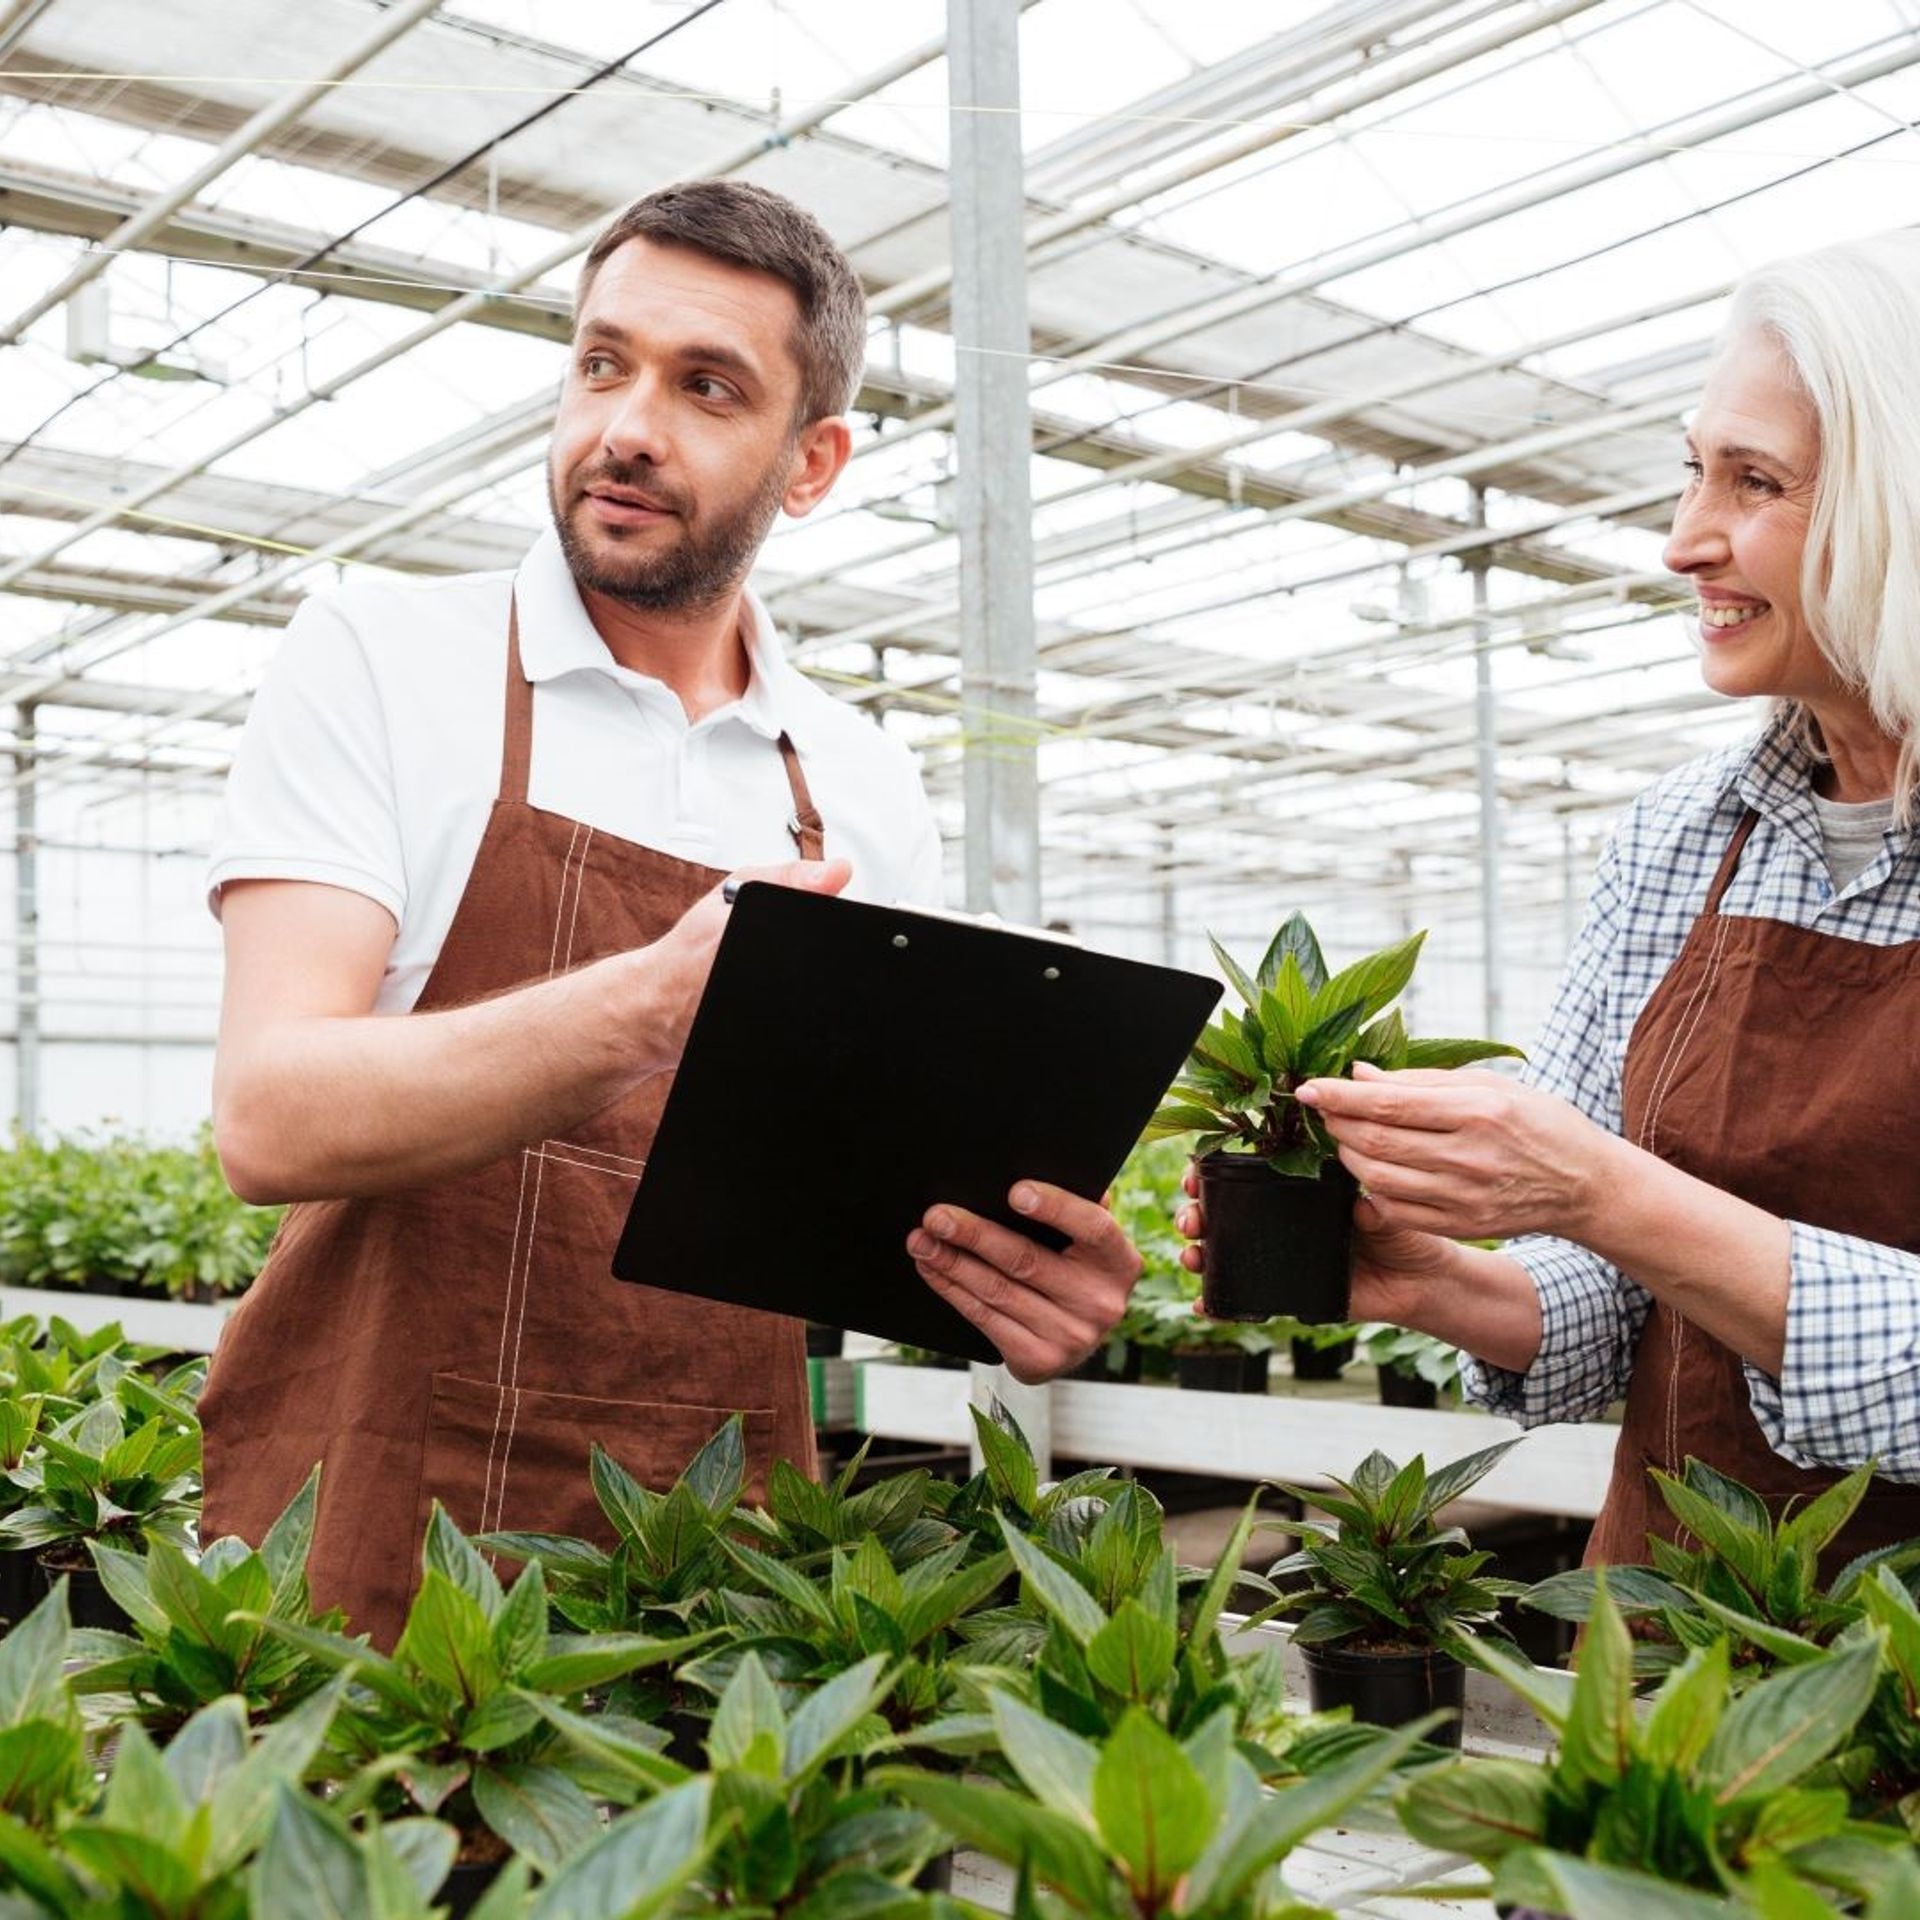 Image of two producers inspecting potted plants on a covered floriculture farm